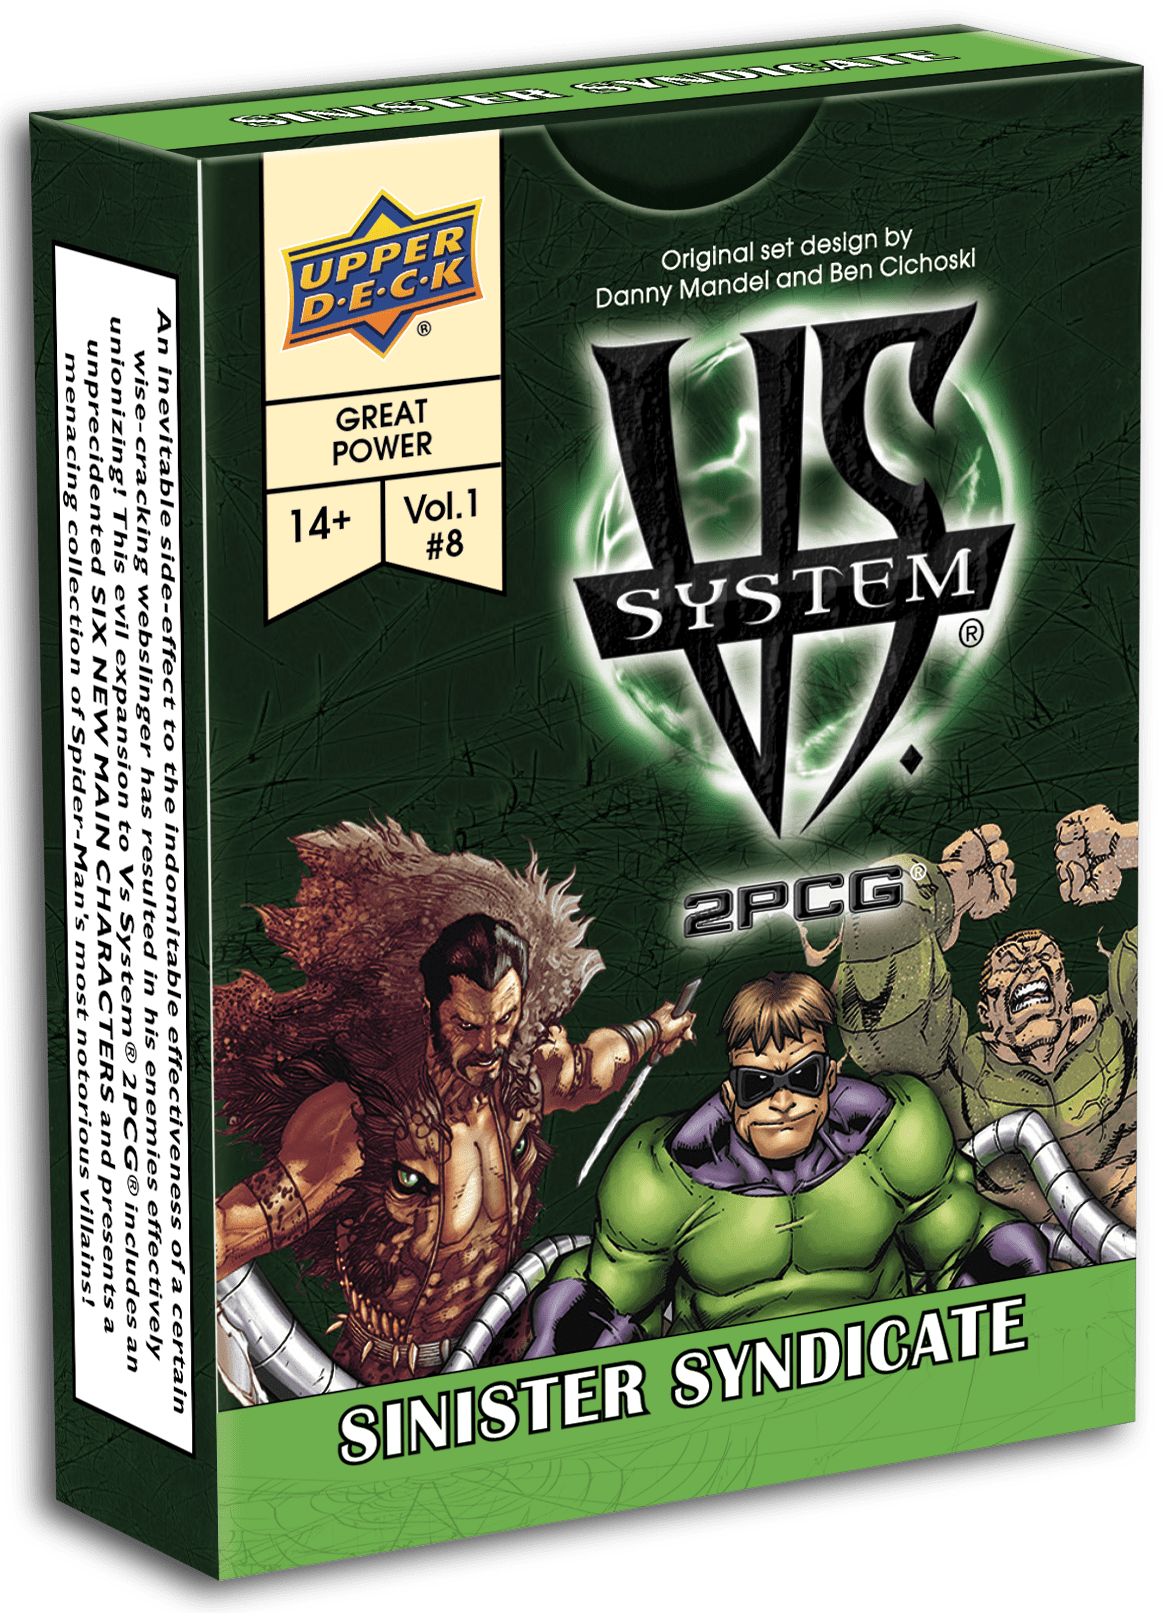 Vs System 2PCG: Sinister Syndicate